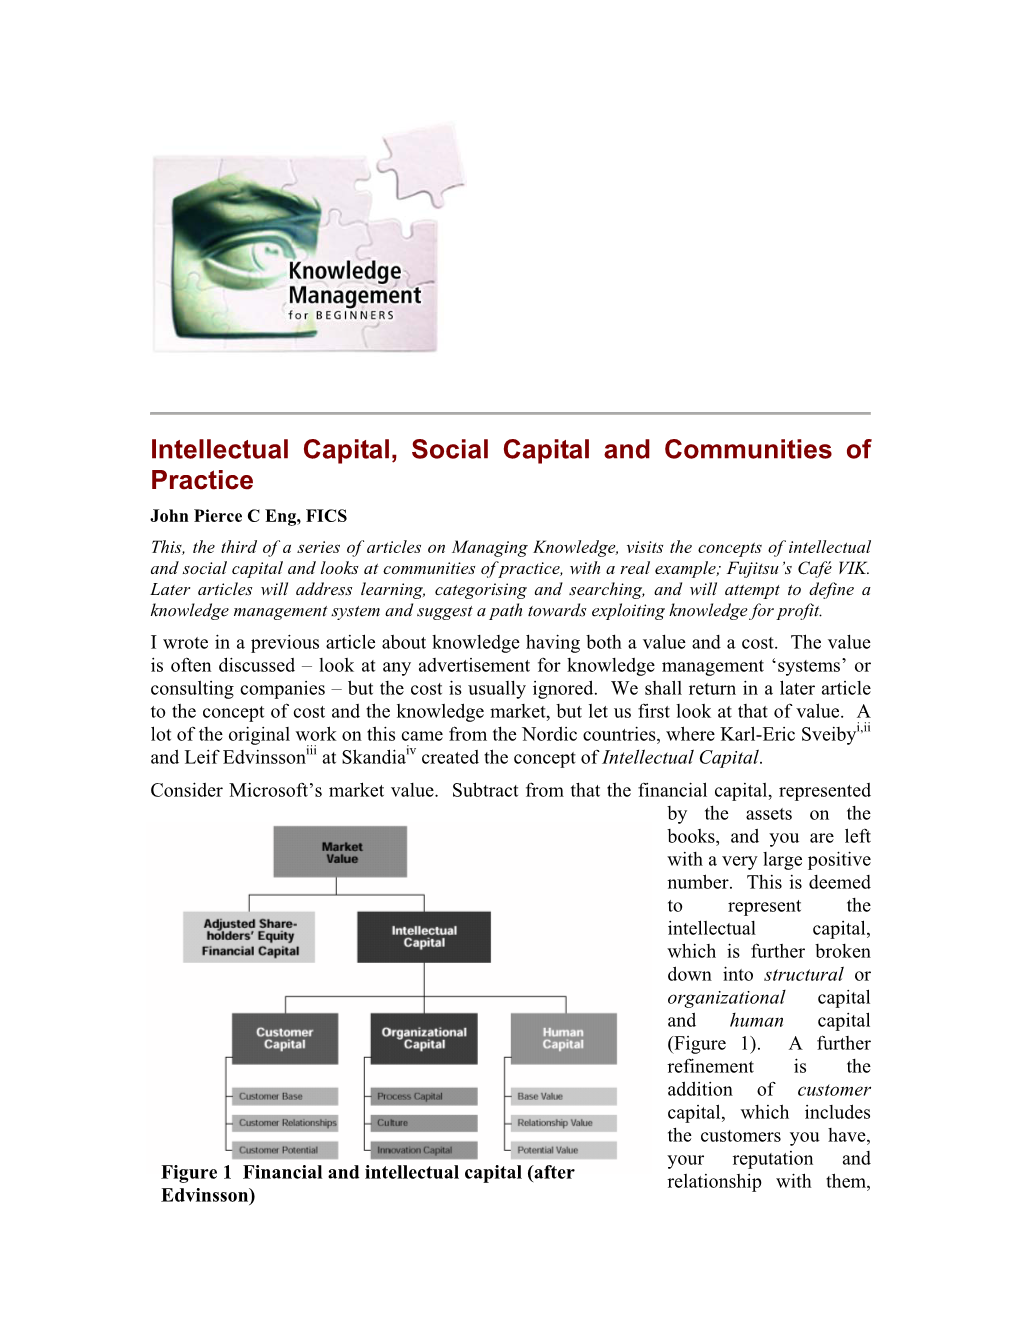 Intellectual Capital, Social Capital and Communities of Practice